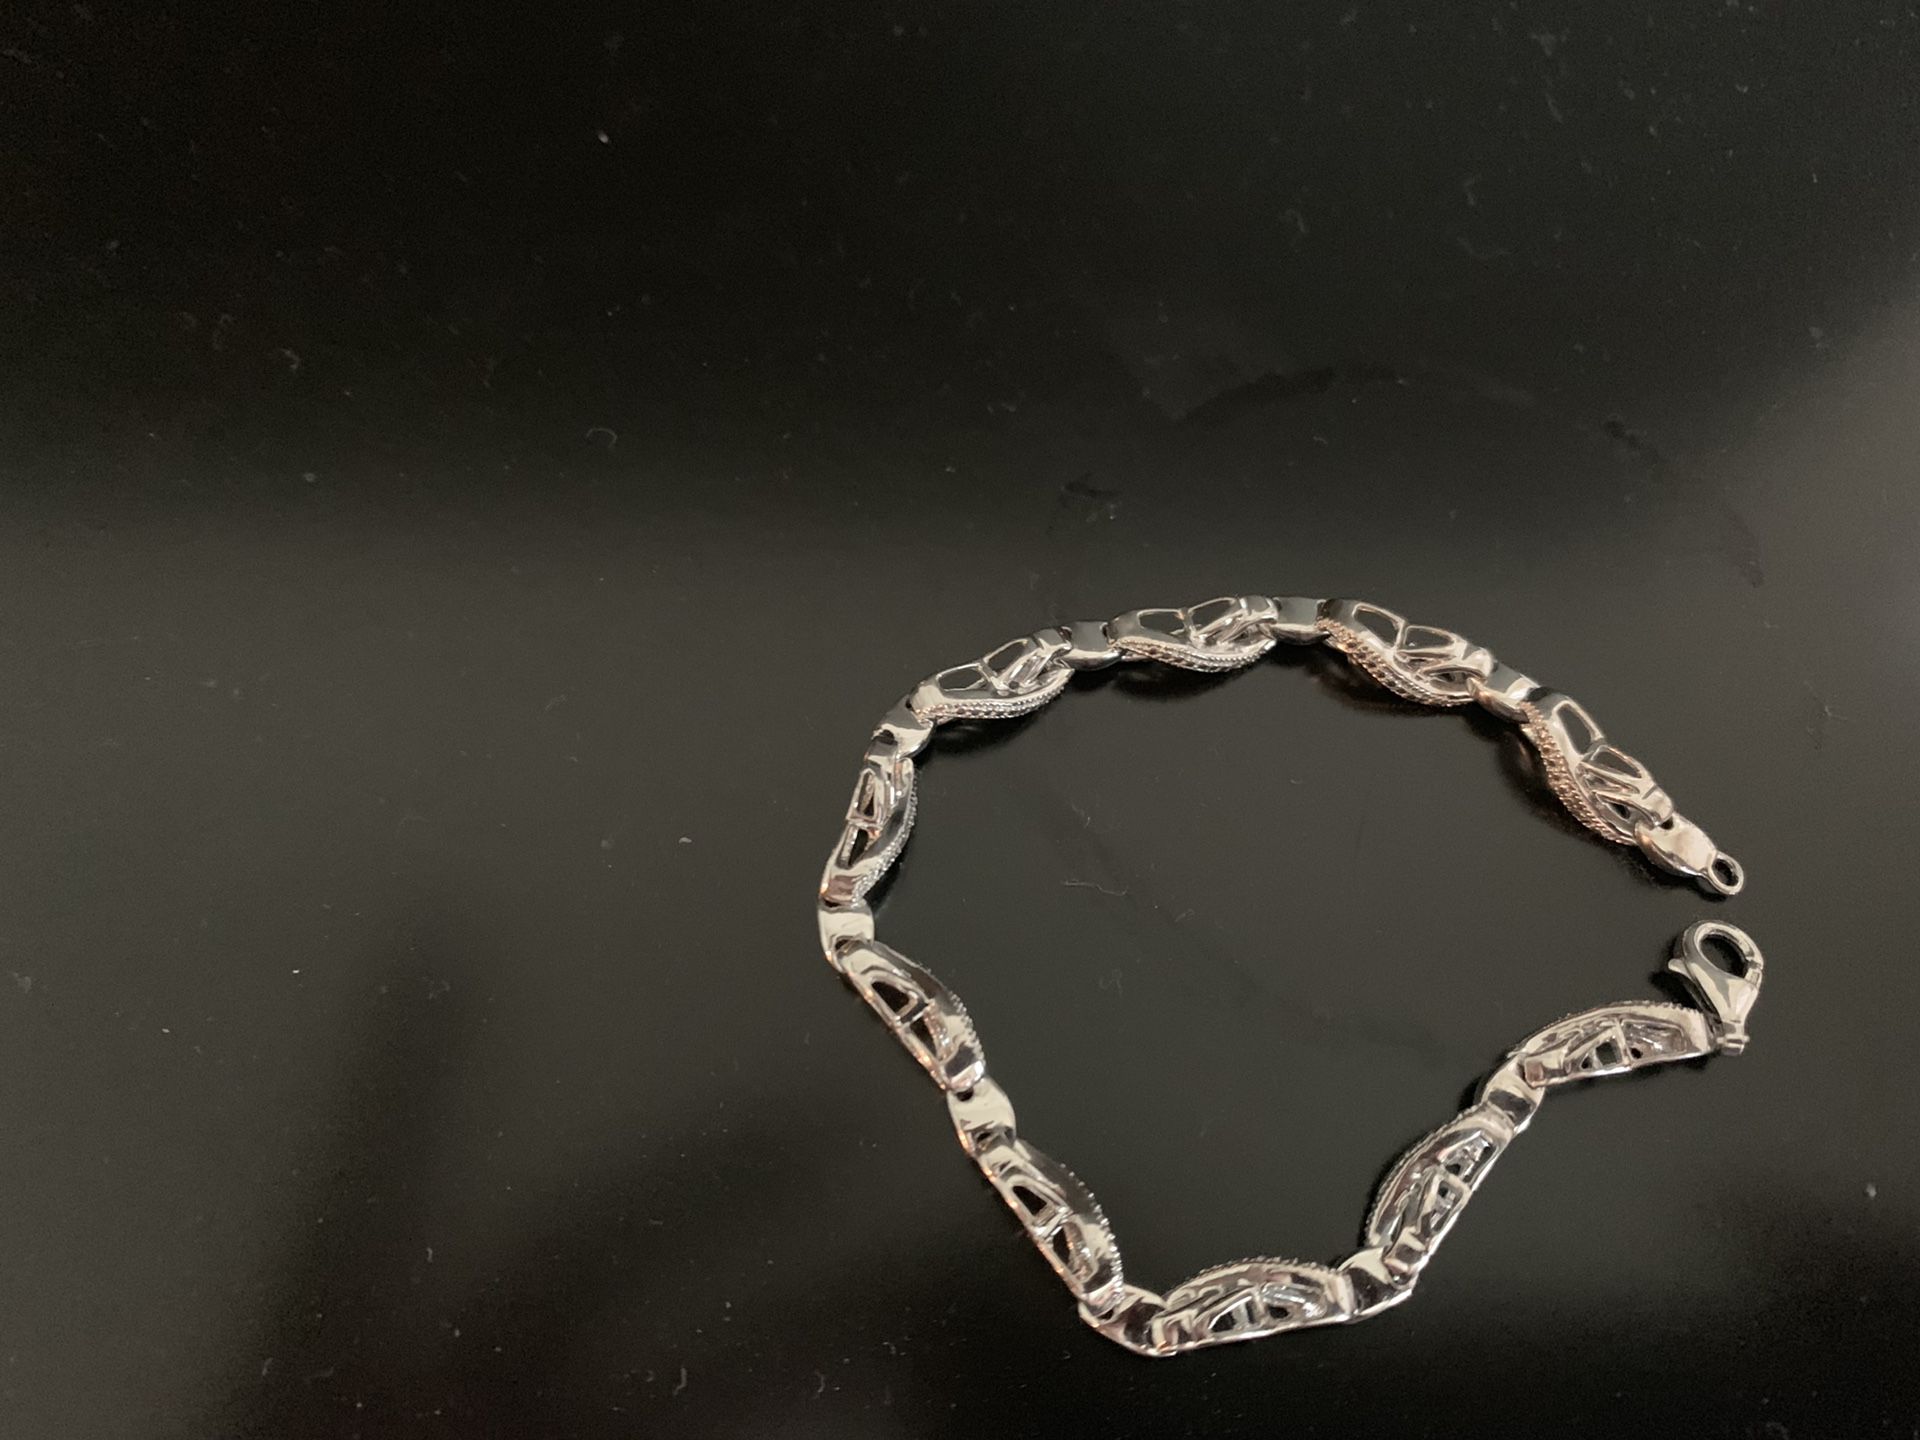 Braclet with diamond accents